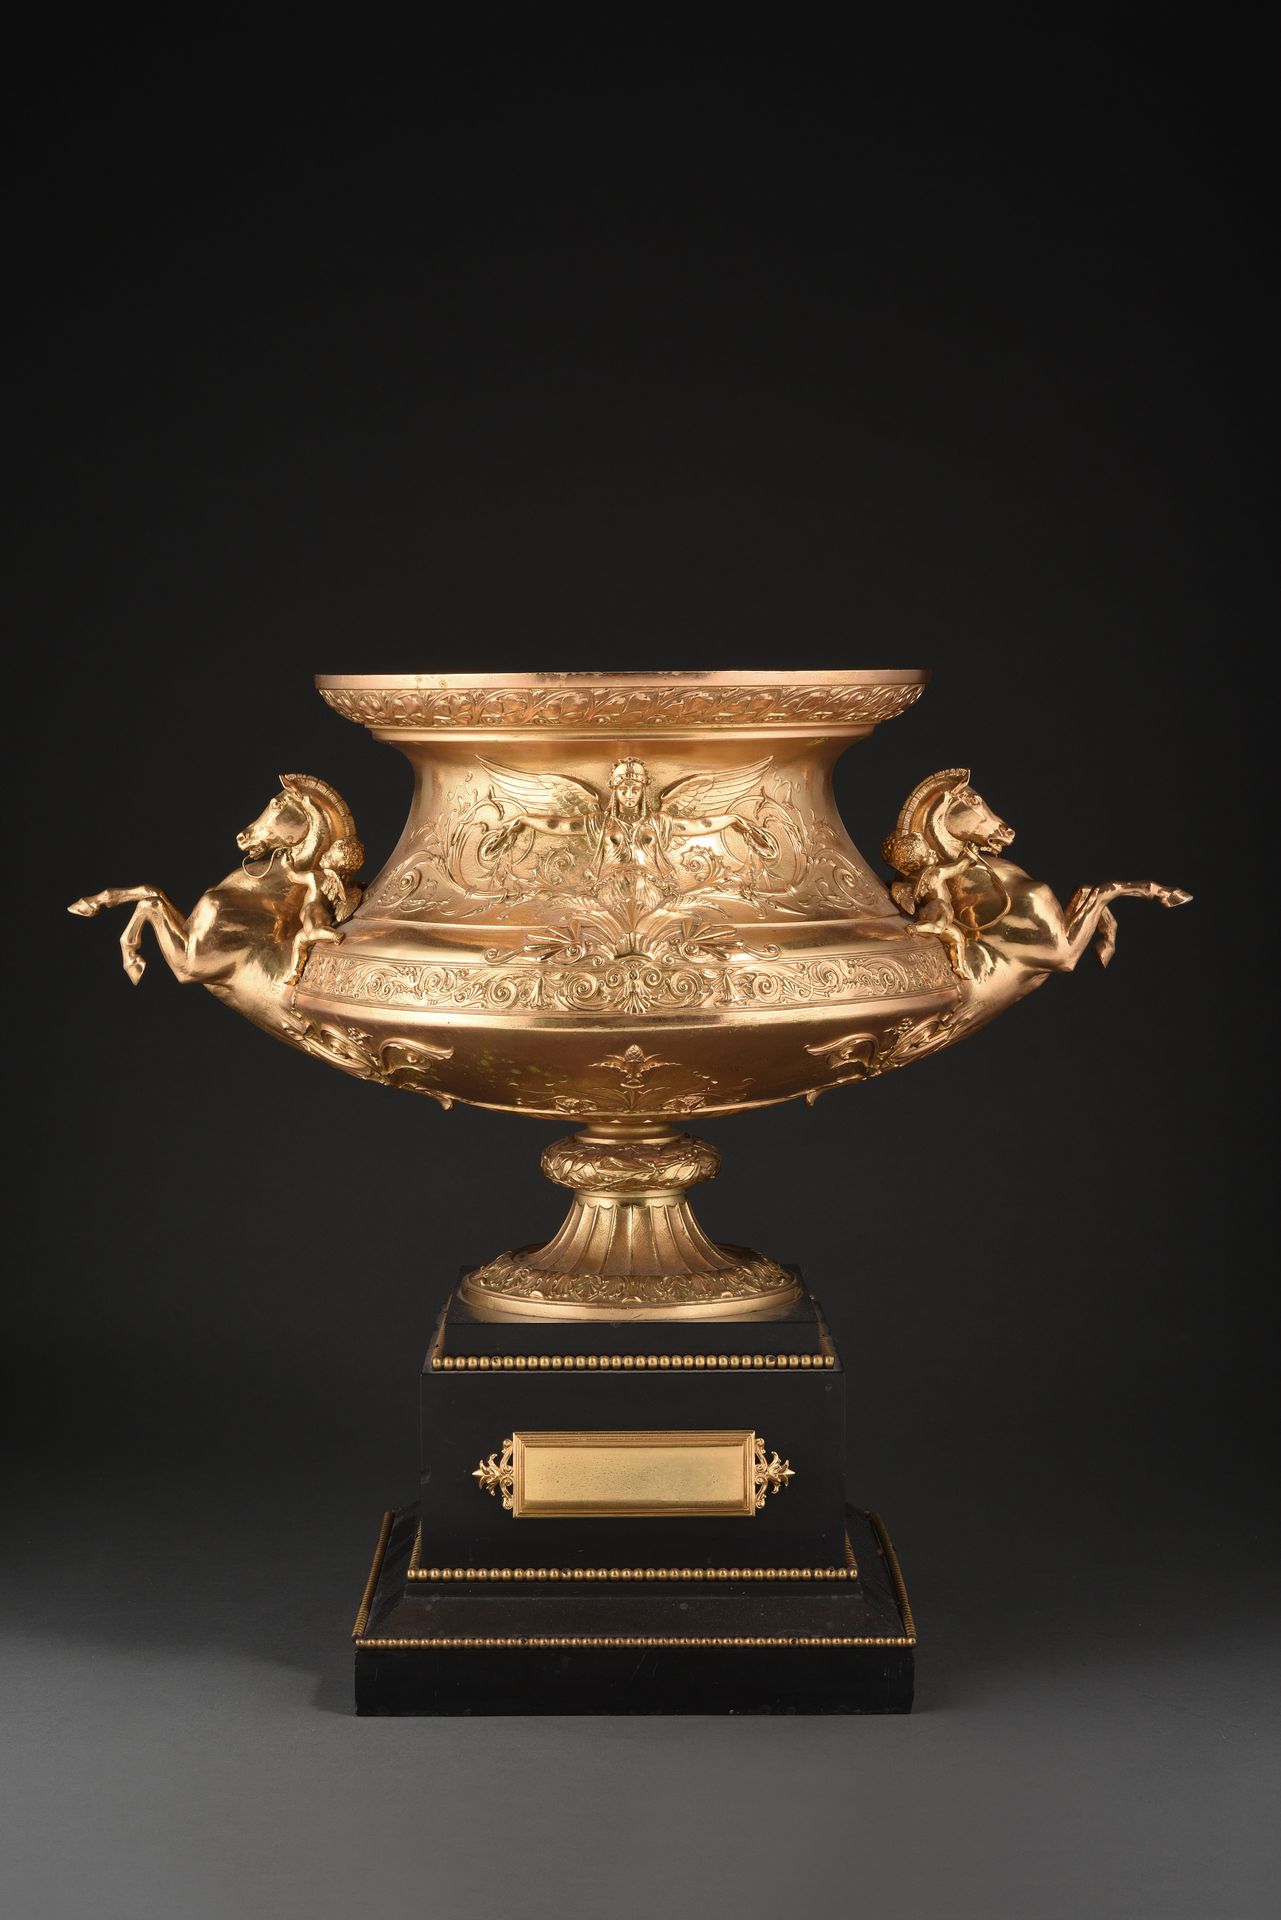 Null LARGE GILDED BRONZE BOWL

The body finely chiseled of Renommées in an envir&hellip;